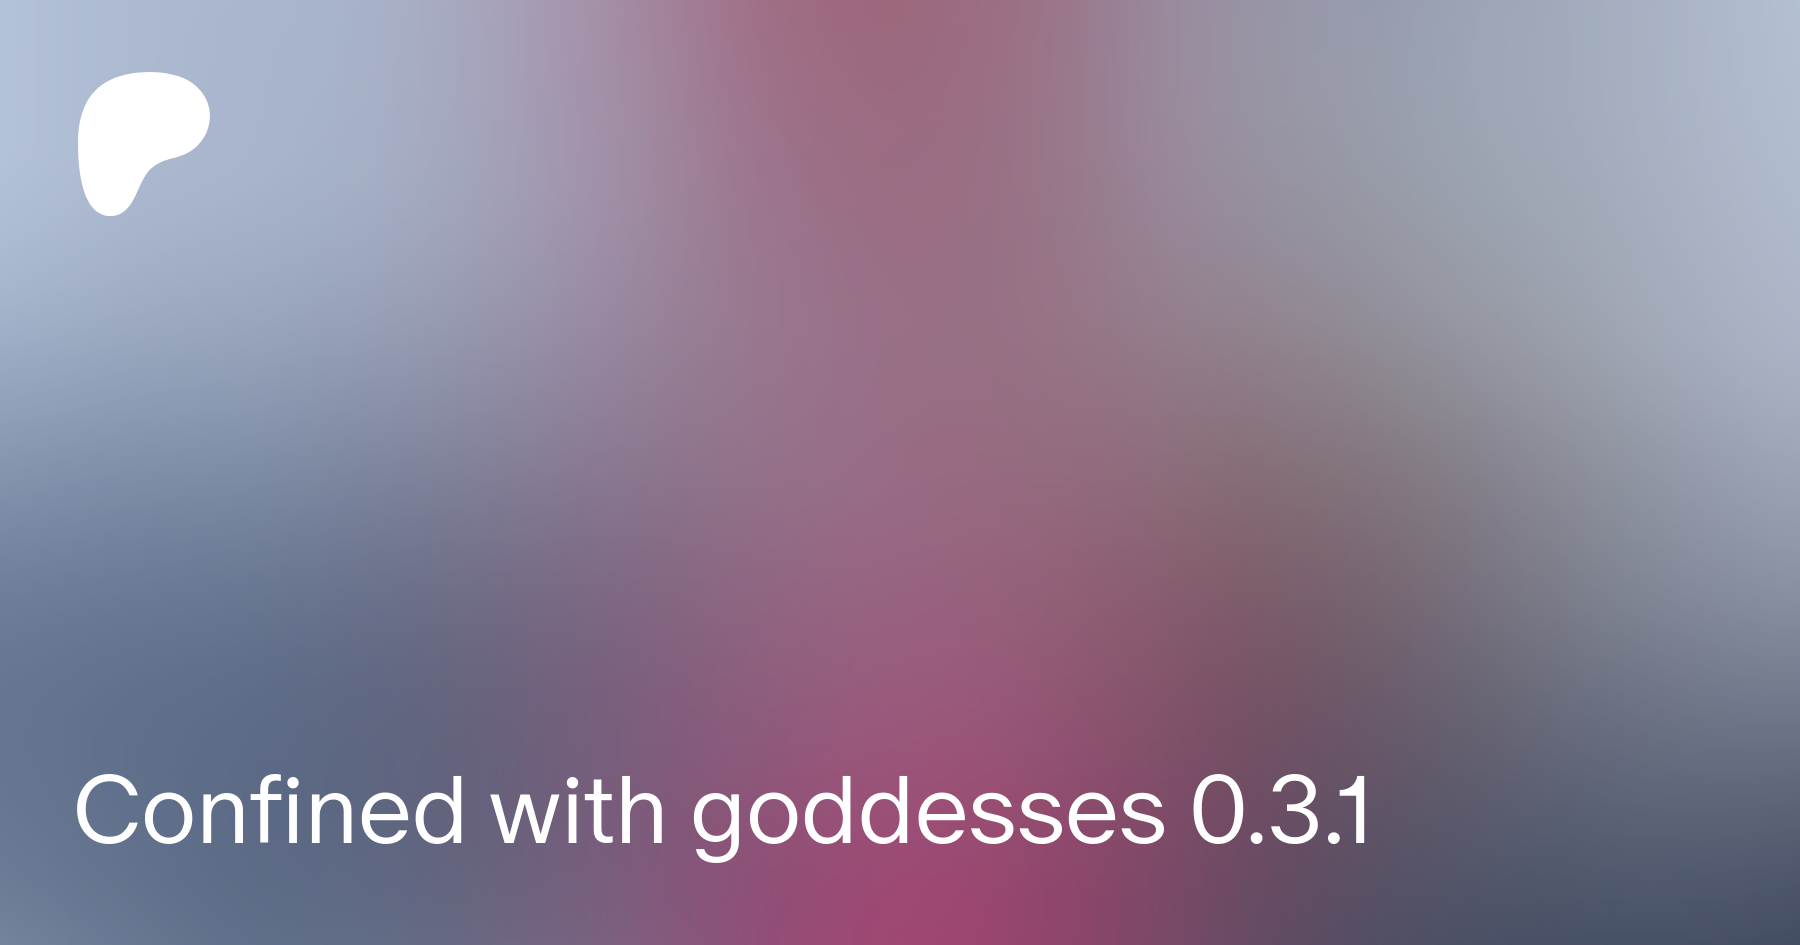 Confined with goddesses 0.3.1